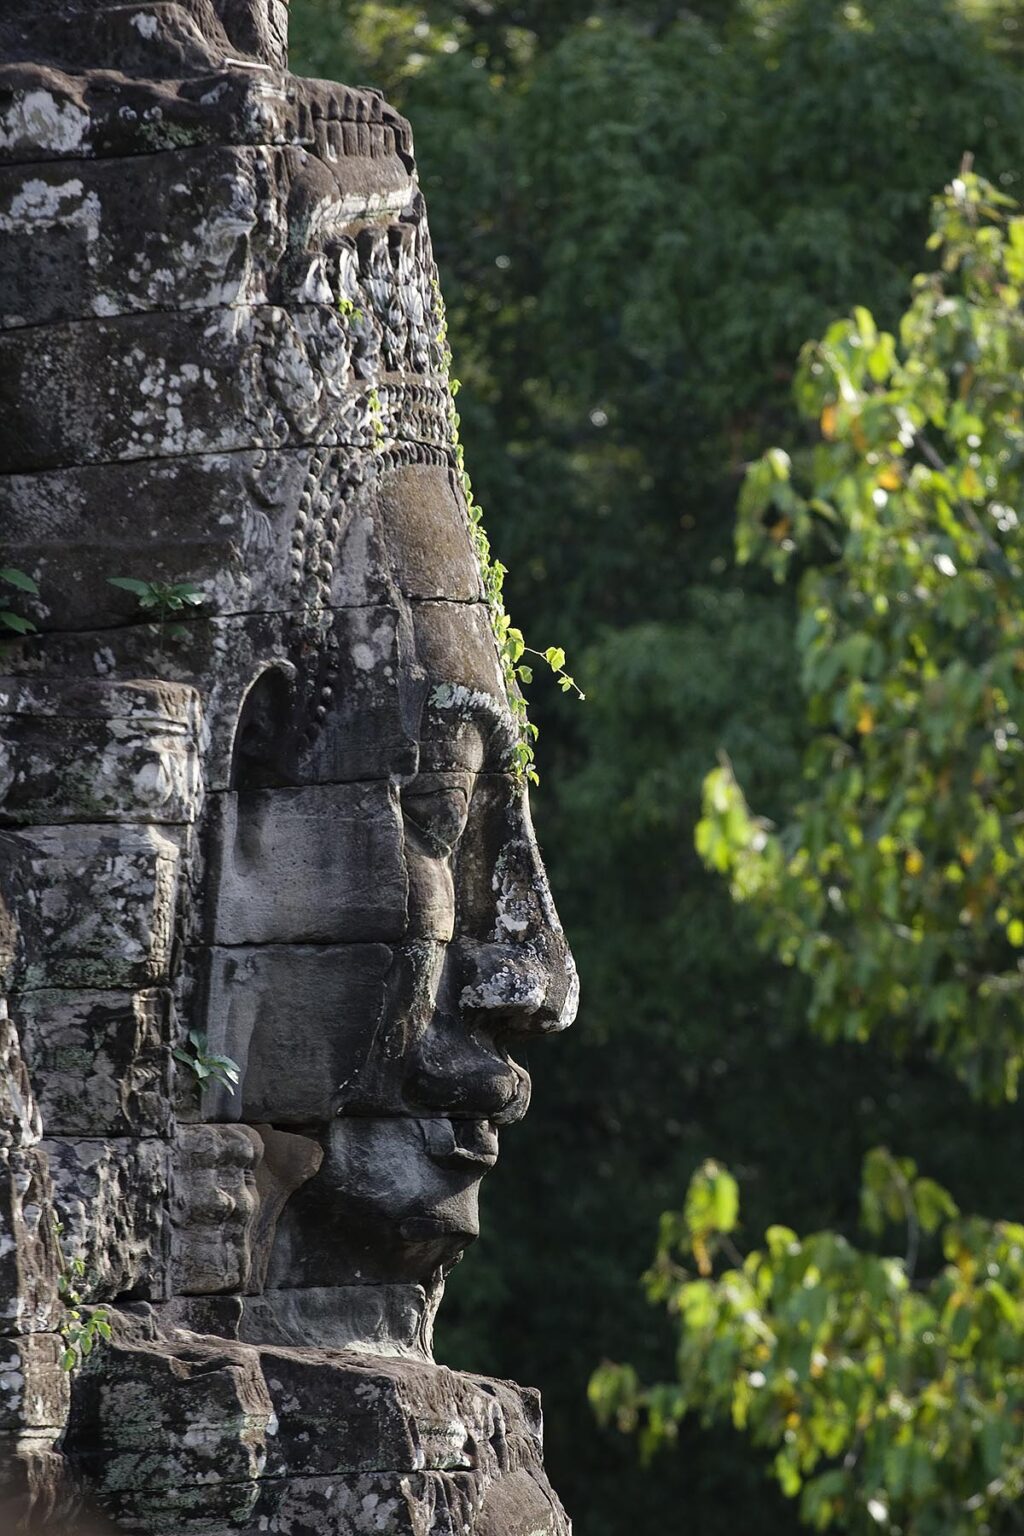 A vine grows on a face tower of The Bayon at Angkor Thom, the largest Khmer city ever built by Jayavarman 7 & 8, are part of the Angkor Wat complex - Siem Reap, Cambodia